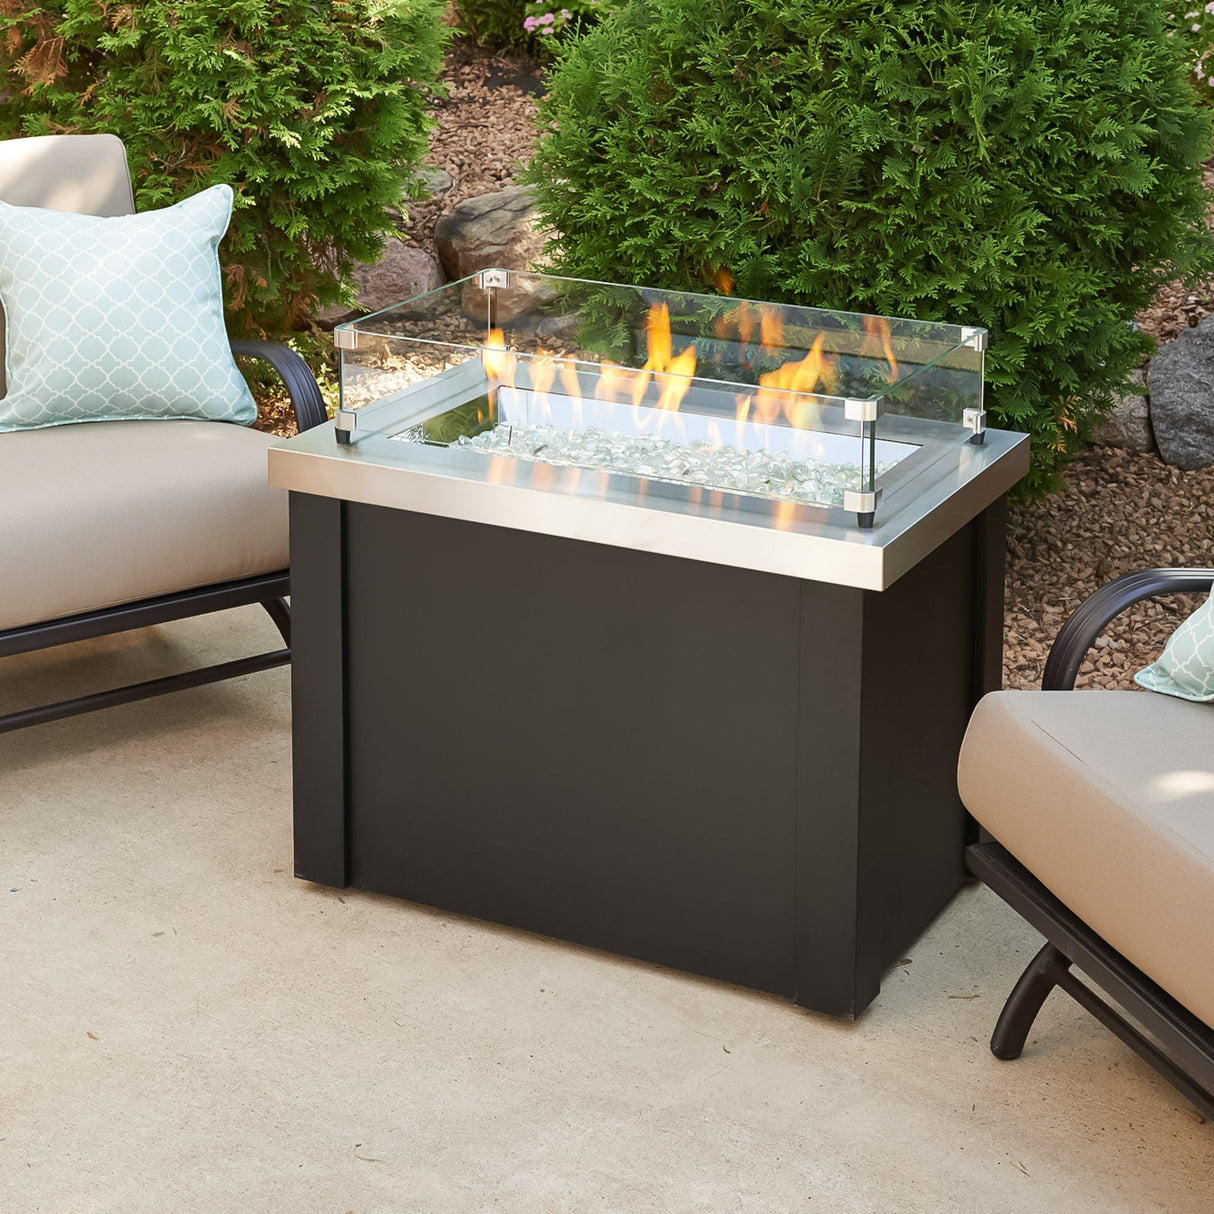 A glass wind guard placed on the Providence Rectangular Gas Fire Pit Table protecting the flame from the wind